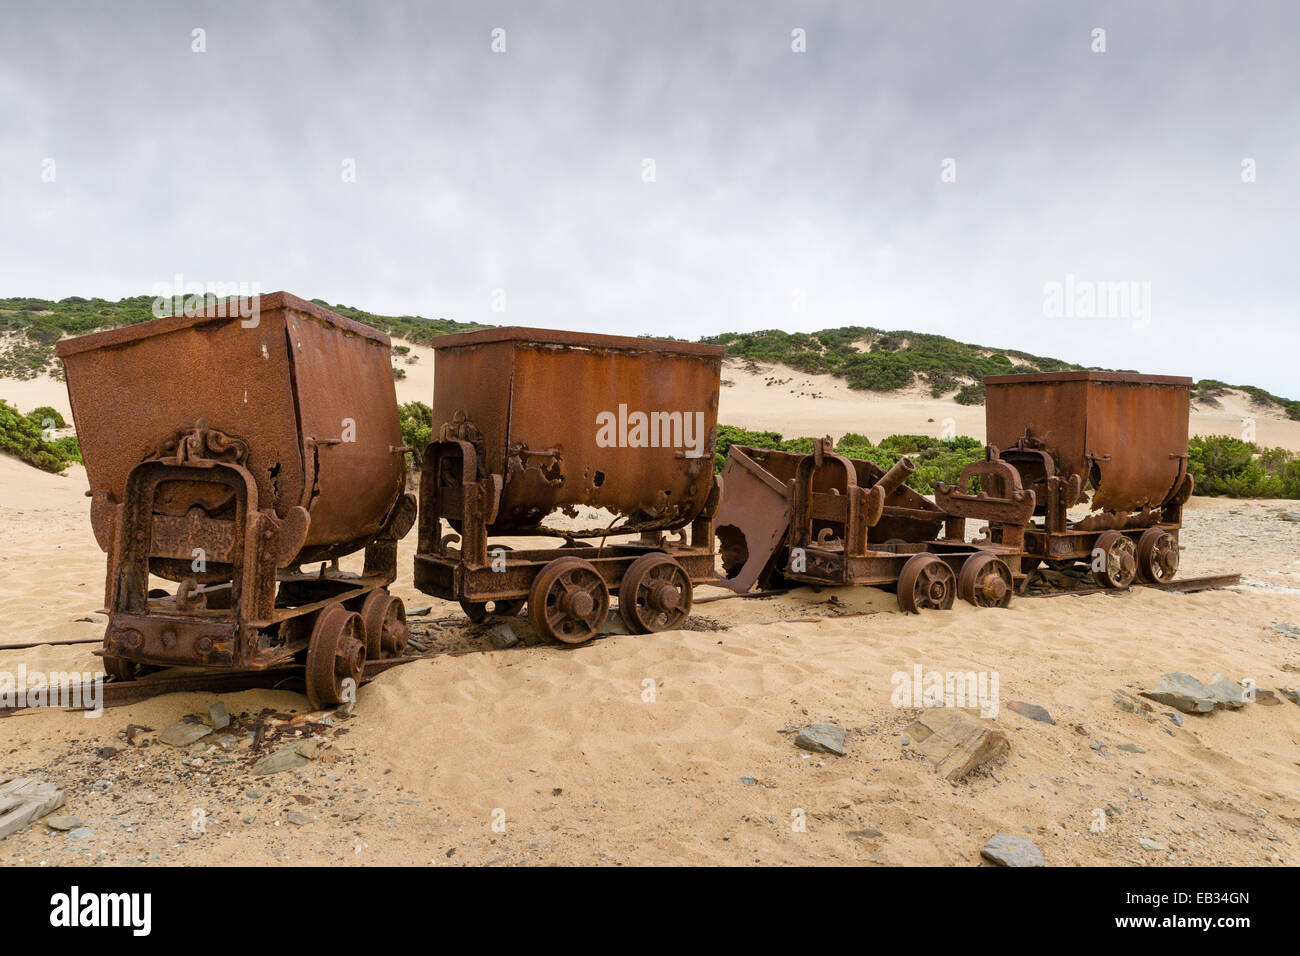 Tippers or tipping wagons on old mine tracks in the dunes, Dune di Piscinas d'Ingurtosu, Arbus, Sardinia, Italy Stock Photo